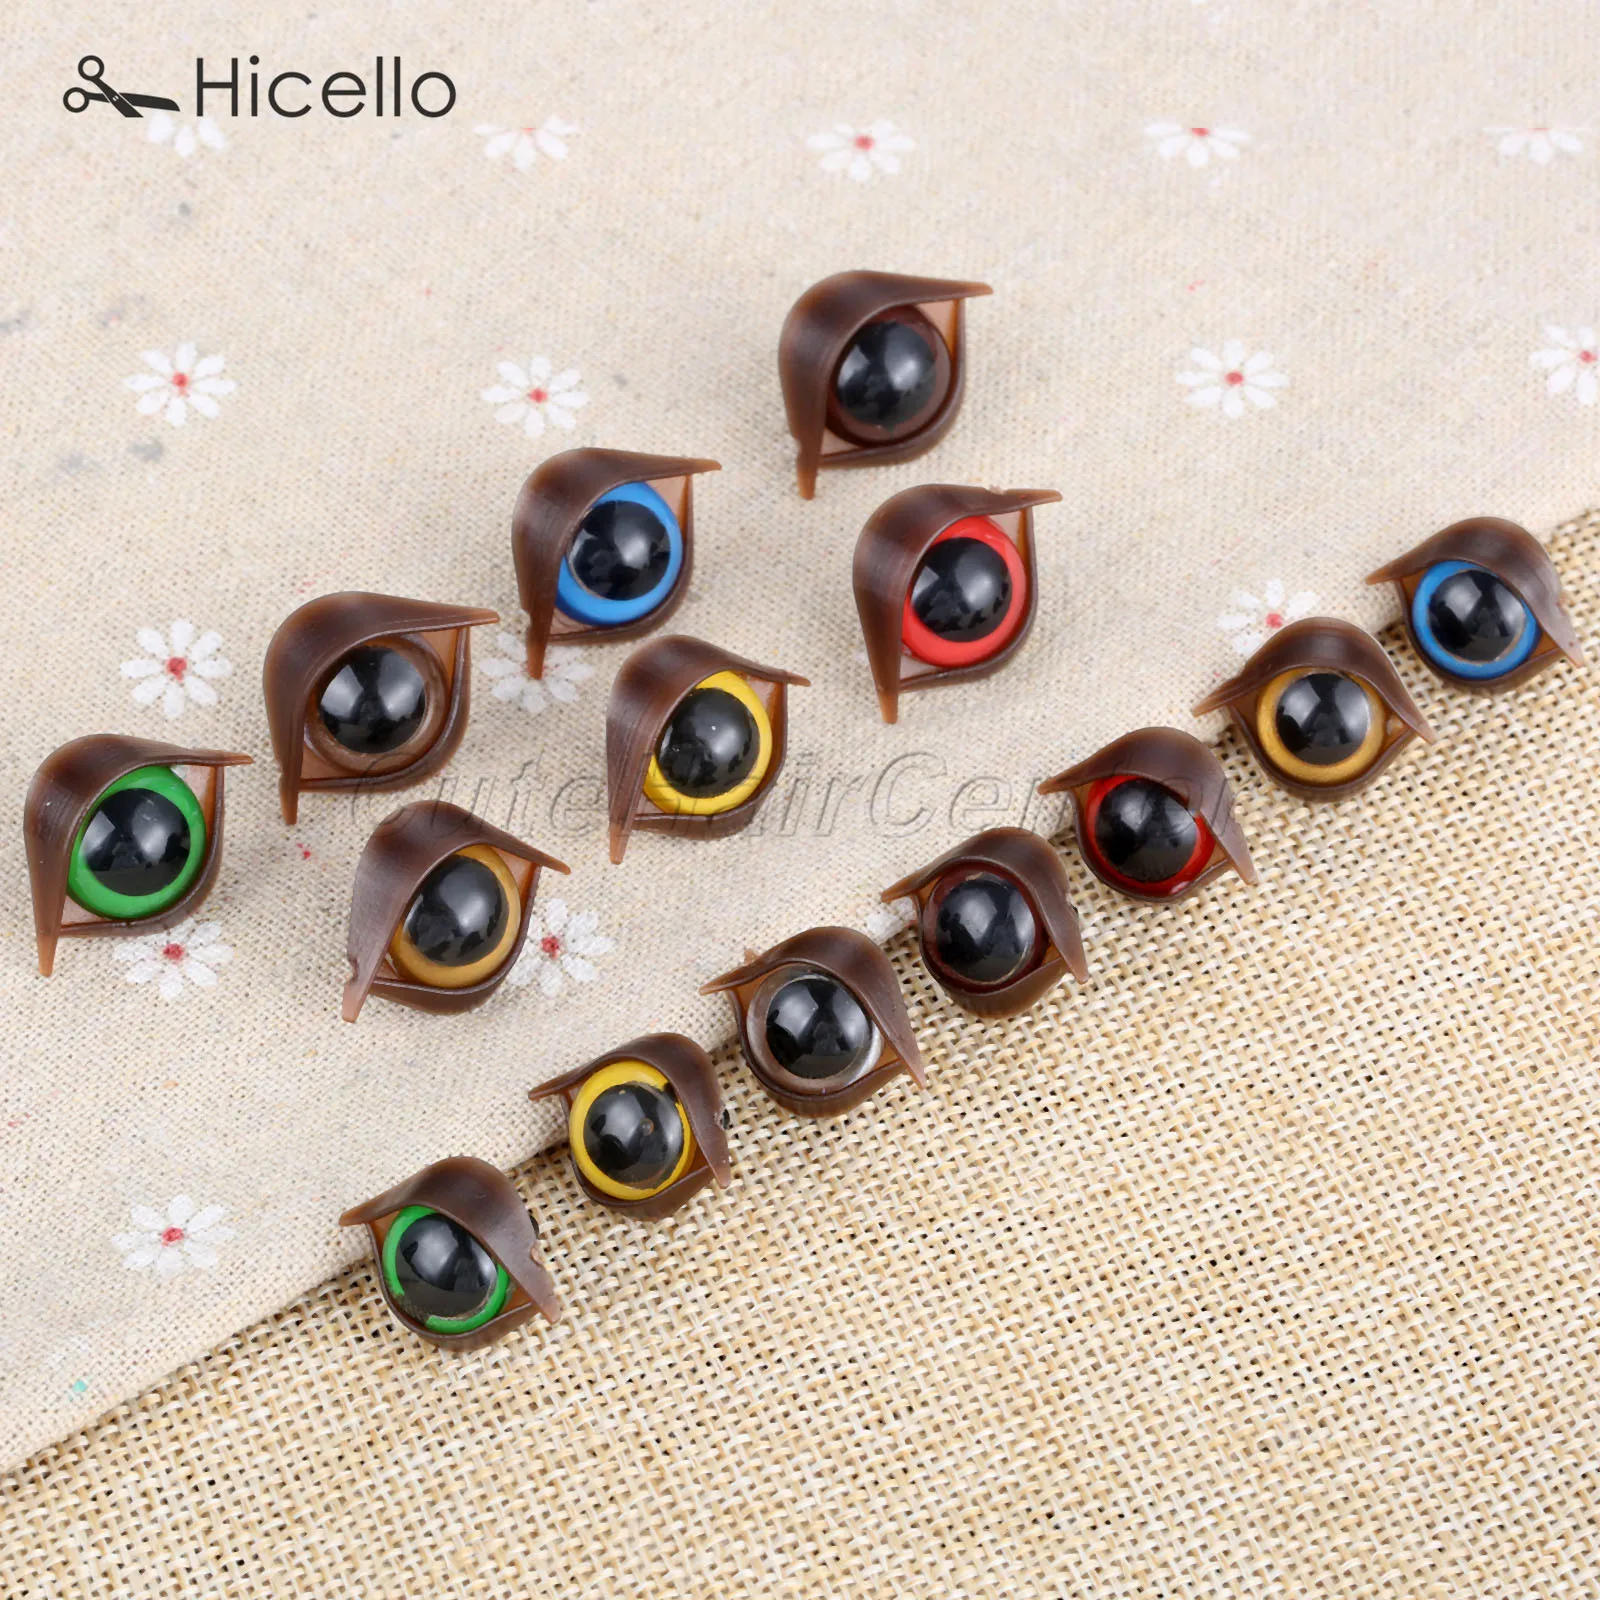 CCINEE 100pcs 6mm-12mm Solid Black Eyes with Washers, Sewing for DIY of Puppet, Plush Animal Making and Teddy Bear